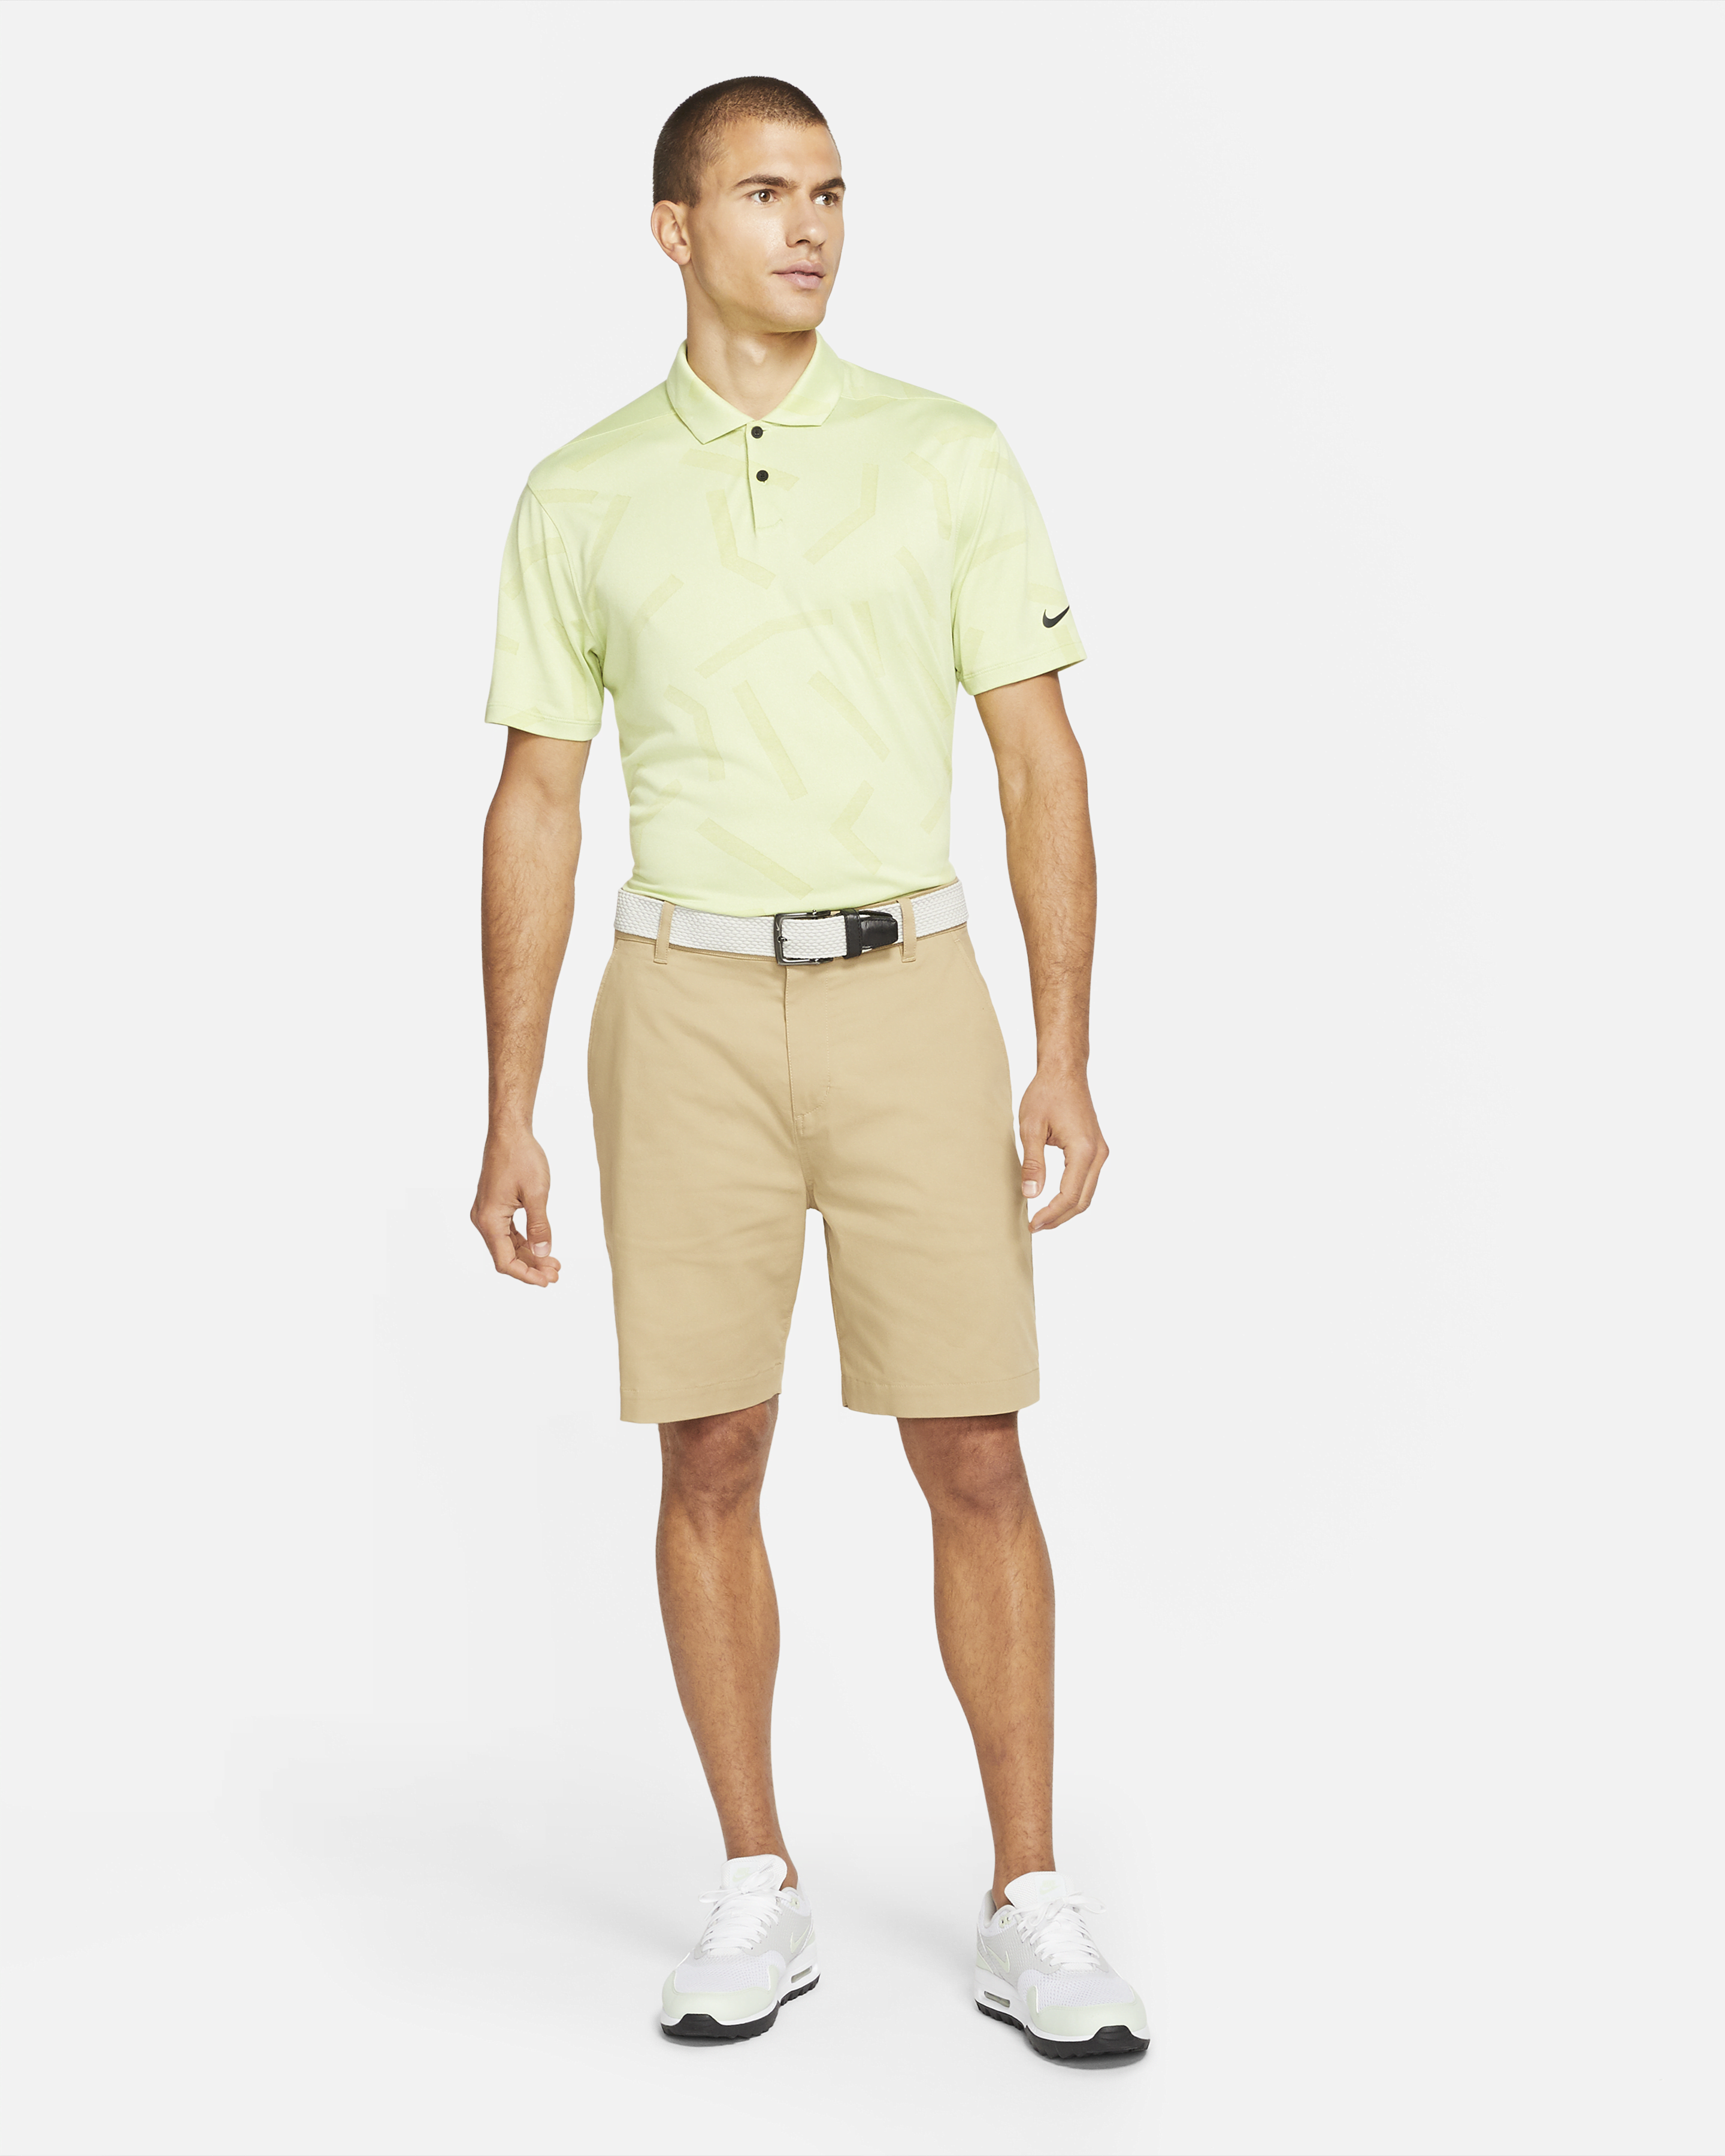 Essentials Men's Classic-Fit Stretch Golf Short (Available in Big &  Tall)